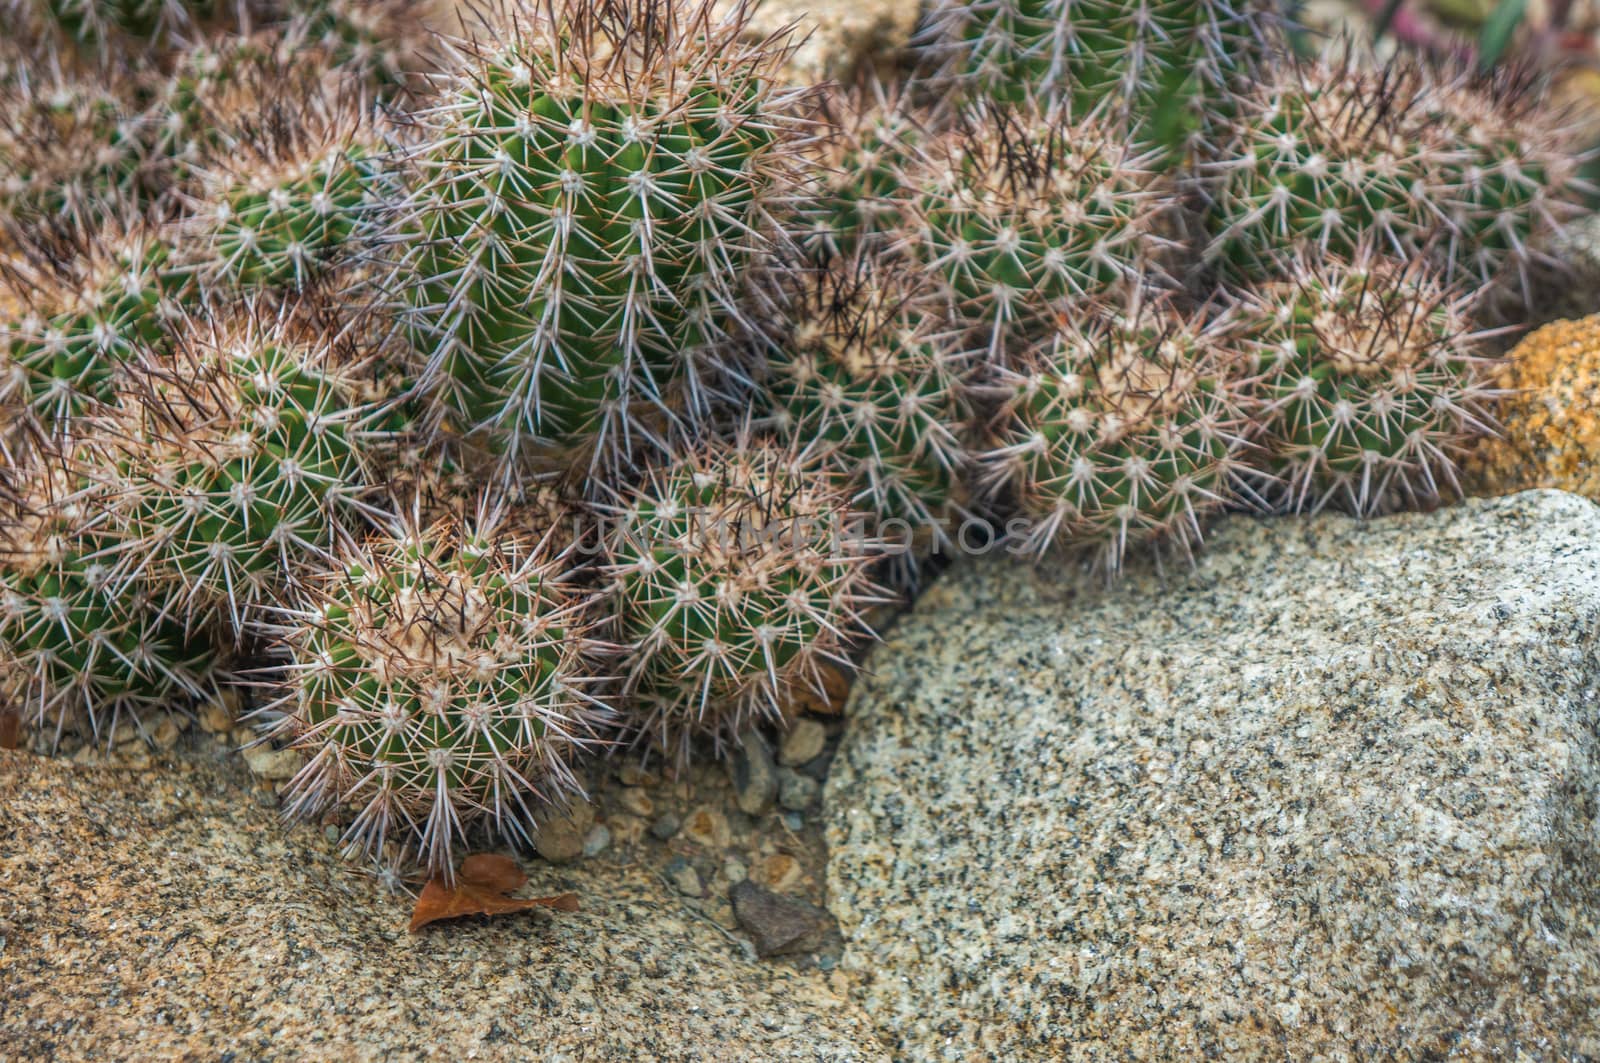 Group of dark green "copiapoa echinata" cactus with gold needles and selective focus. Shot in natural light with marbled rocks as background